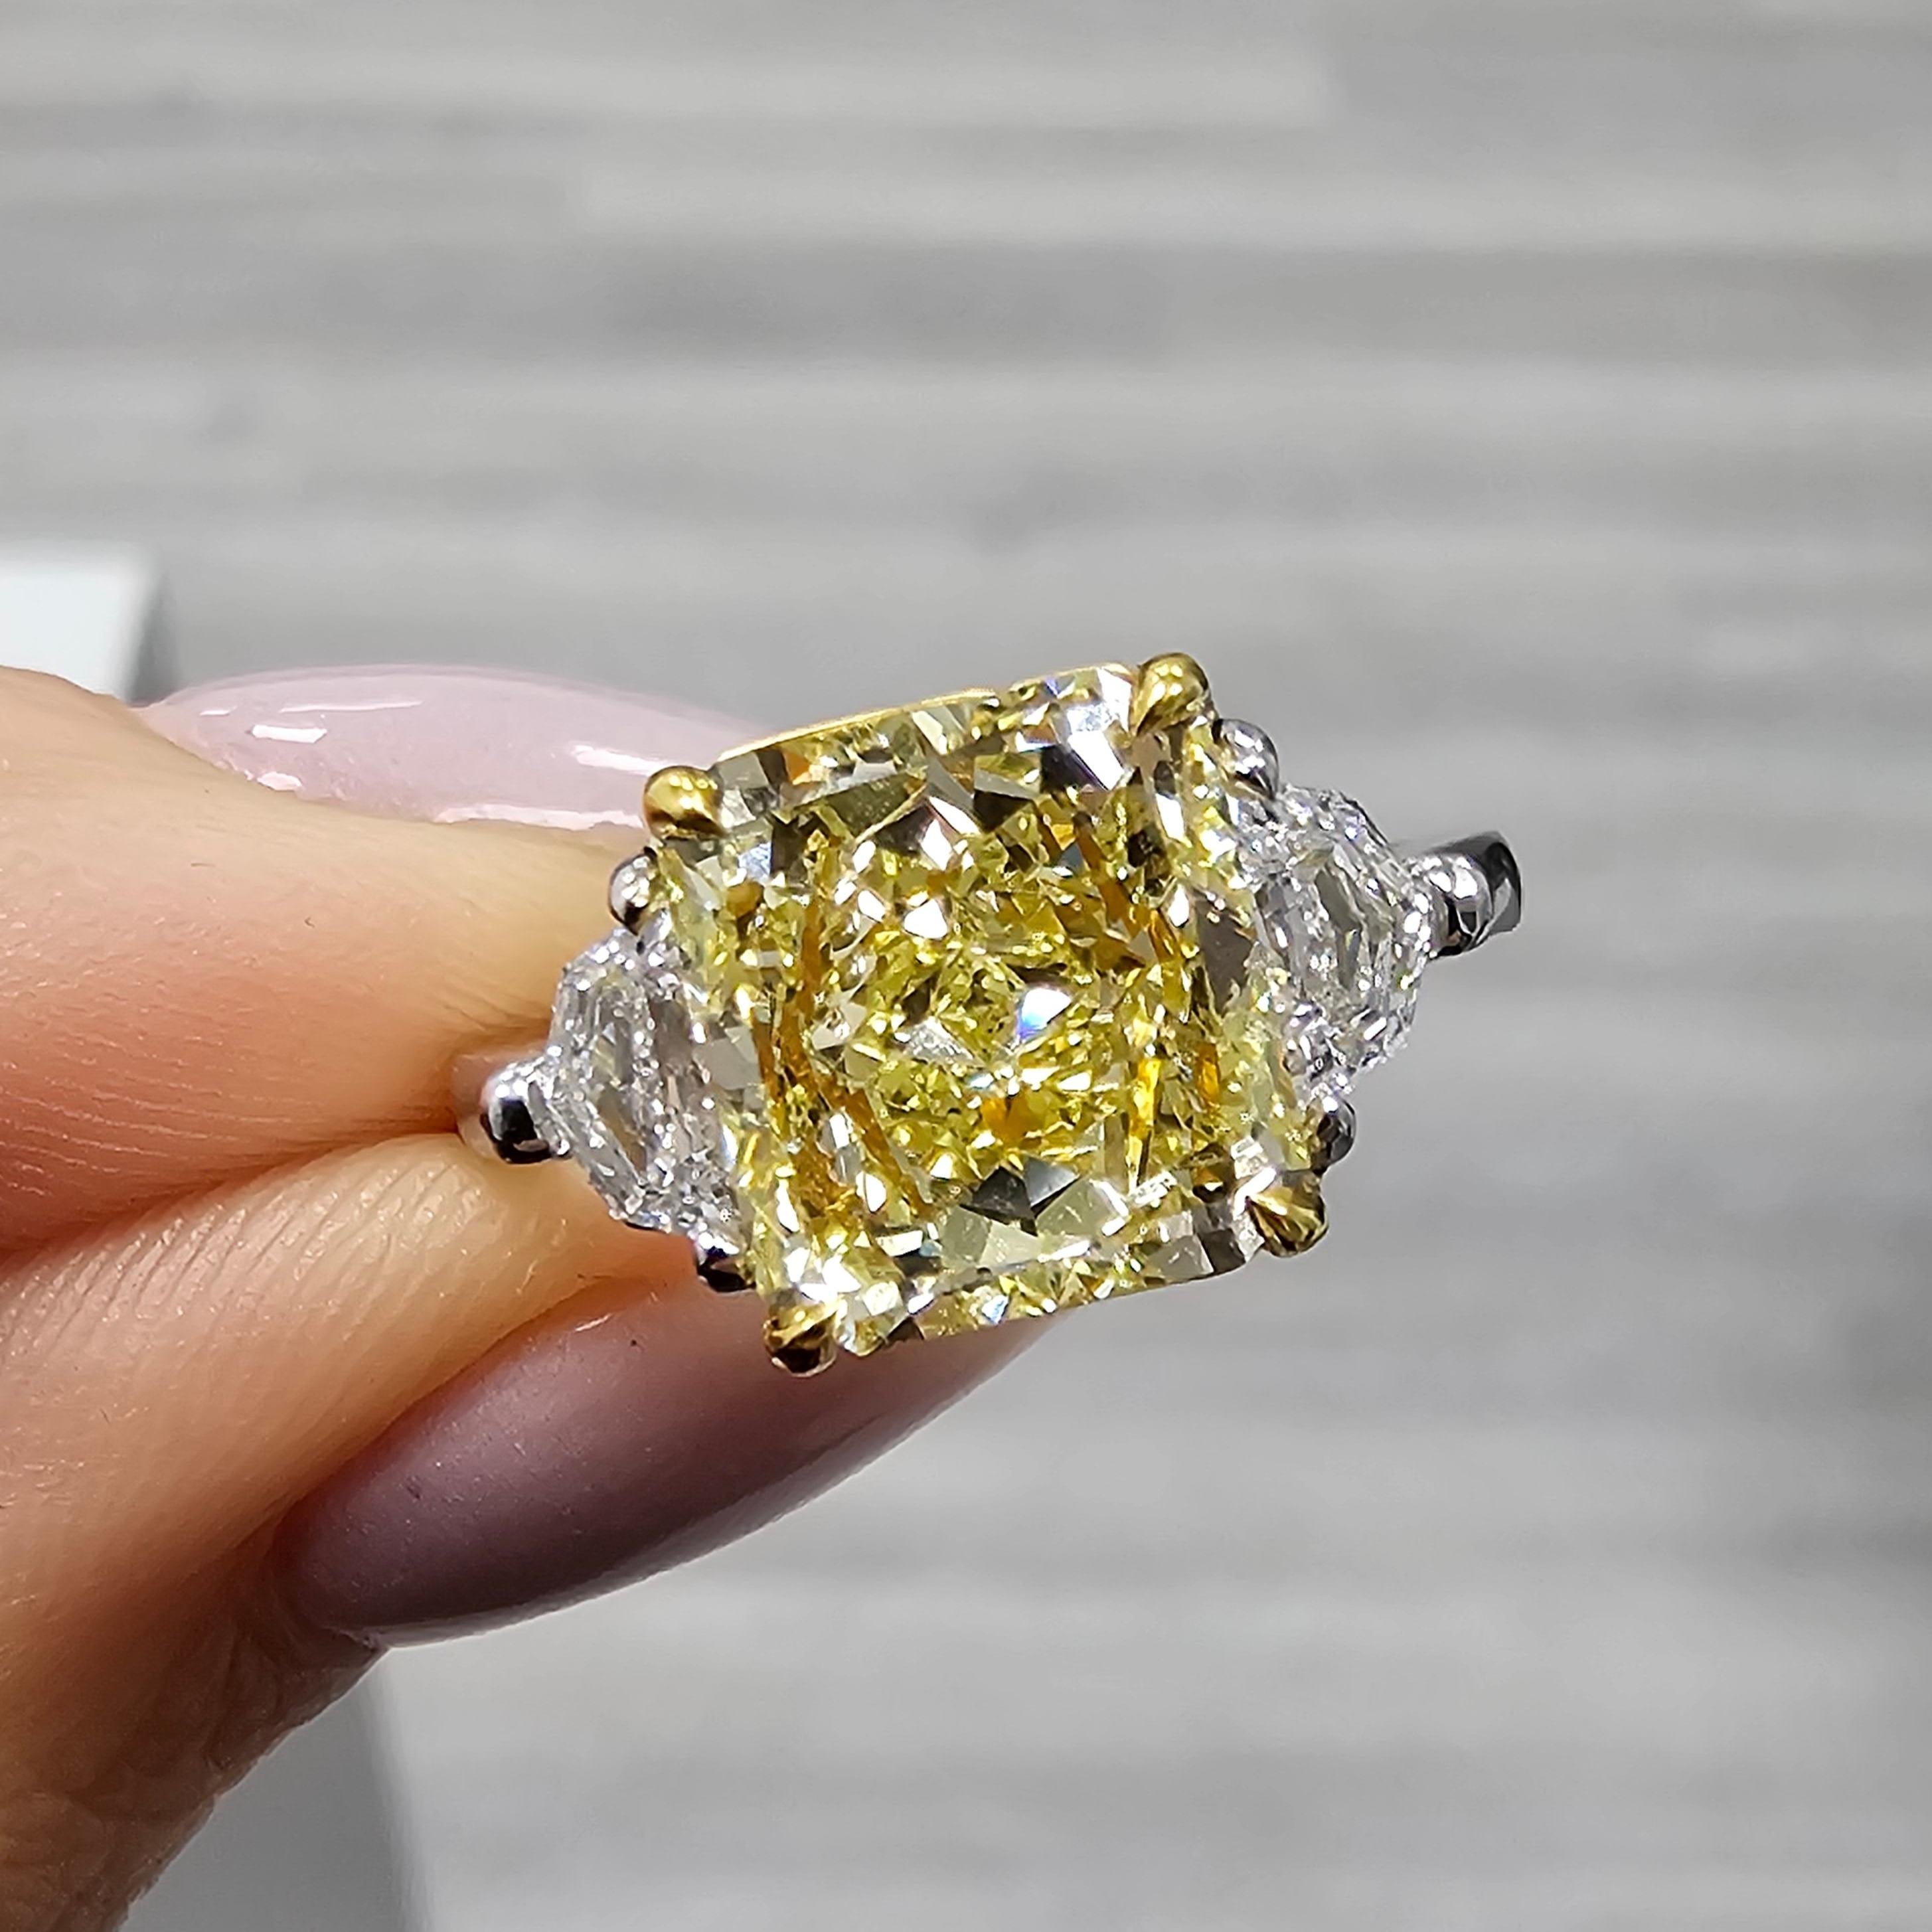 3ct Fancy Intense Yellow 
Square Radiant Cut
Eye clean
Set in Platinum and 18kt Yellow Gold with 0.41ct Epaulettes 
Great for everyday wear and for dressy events
This piece can be viewed before purchase in our showroom in NYC or at one of our retail